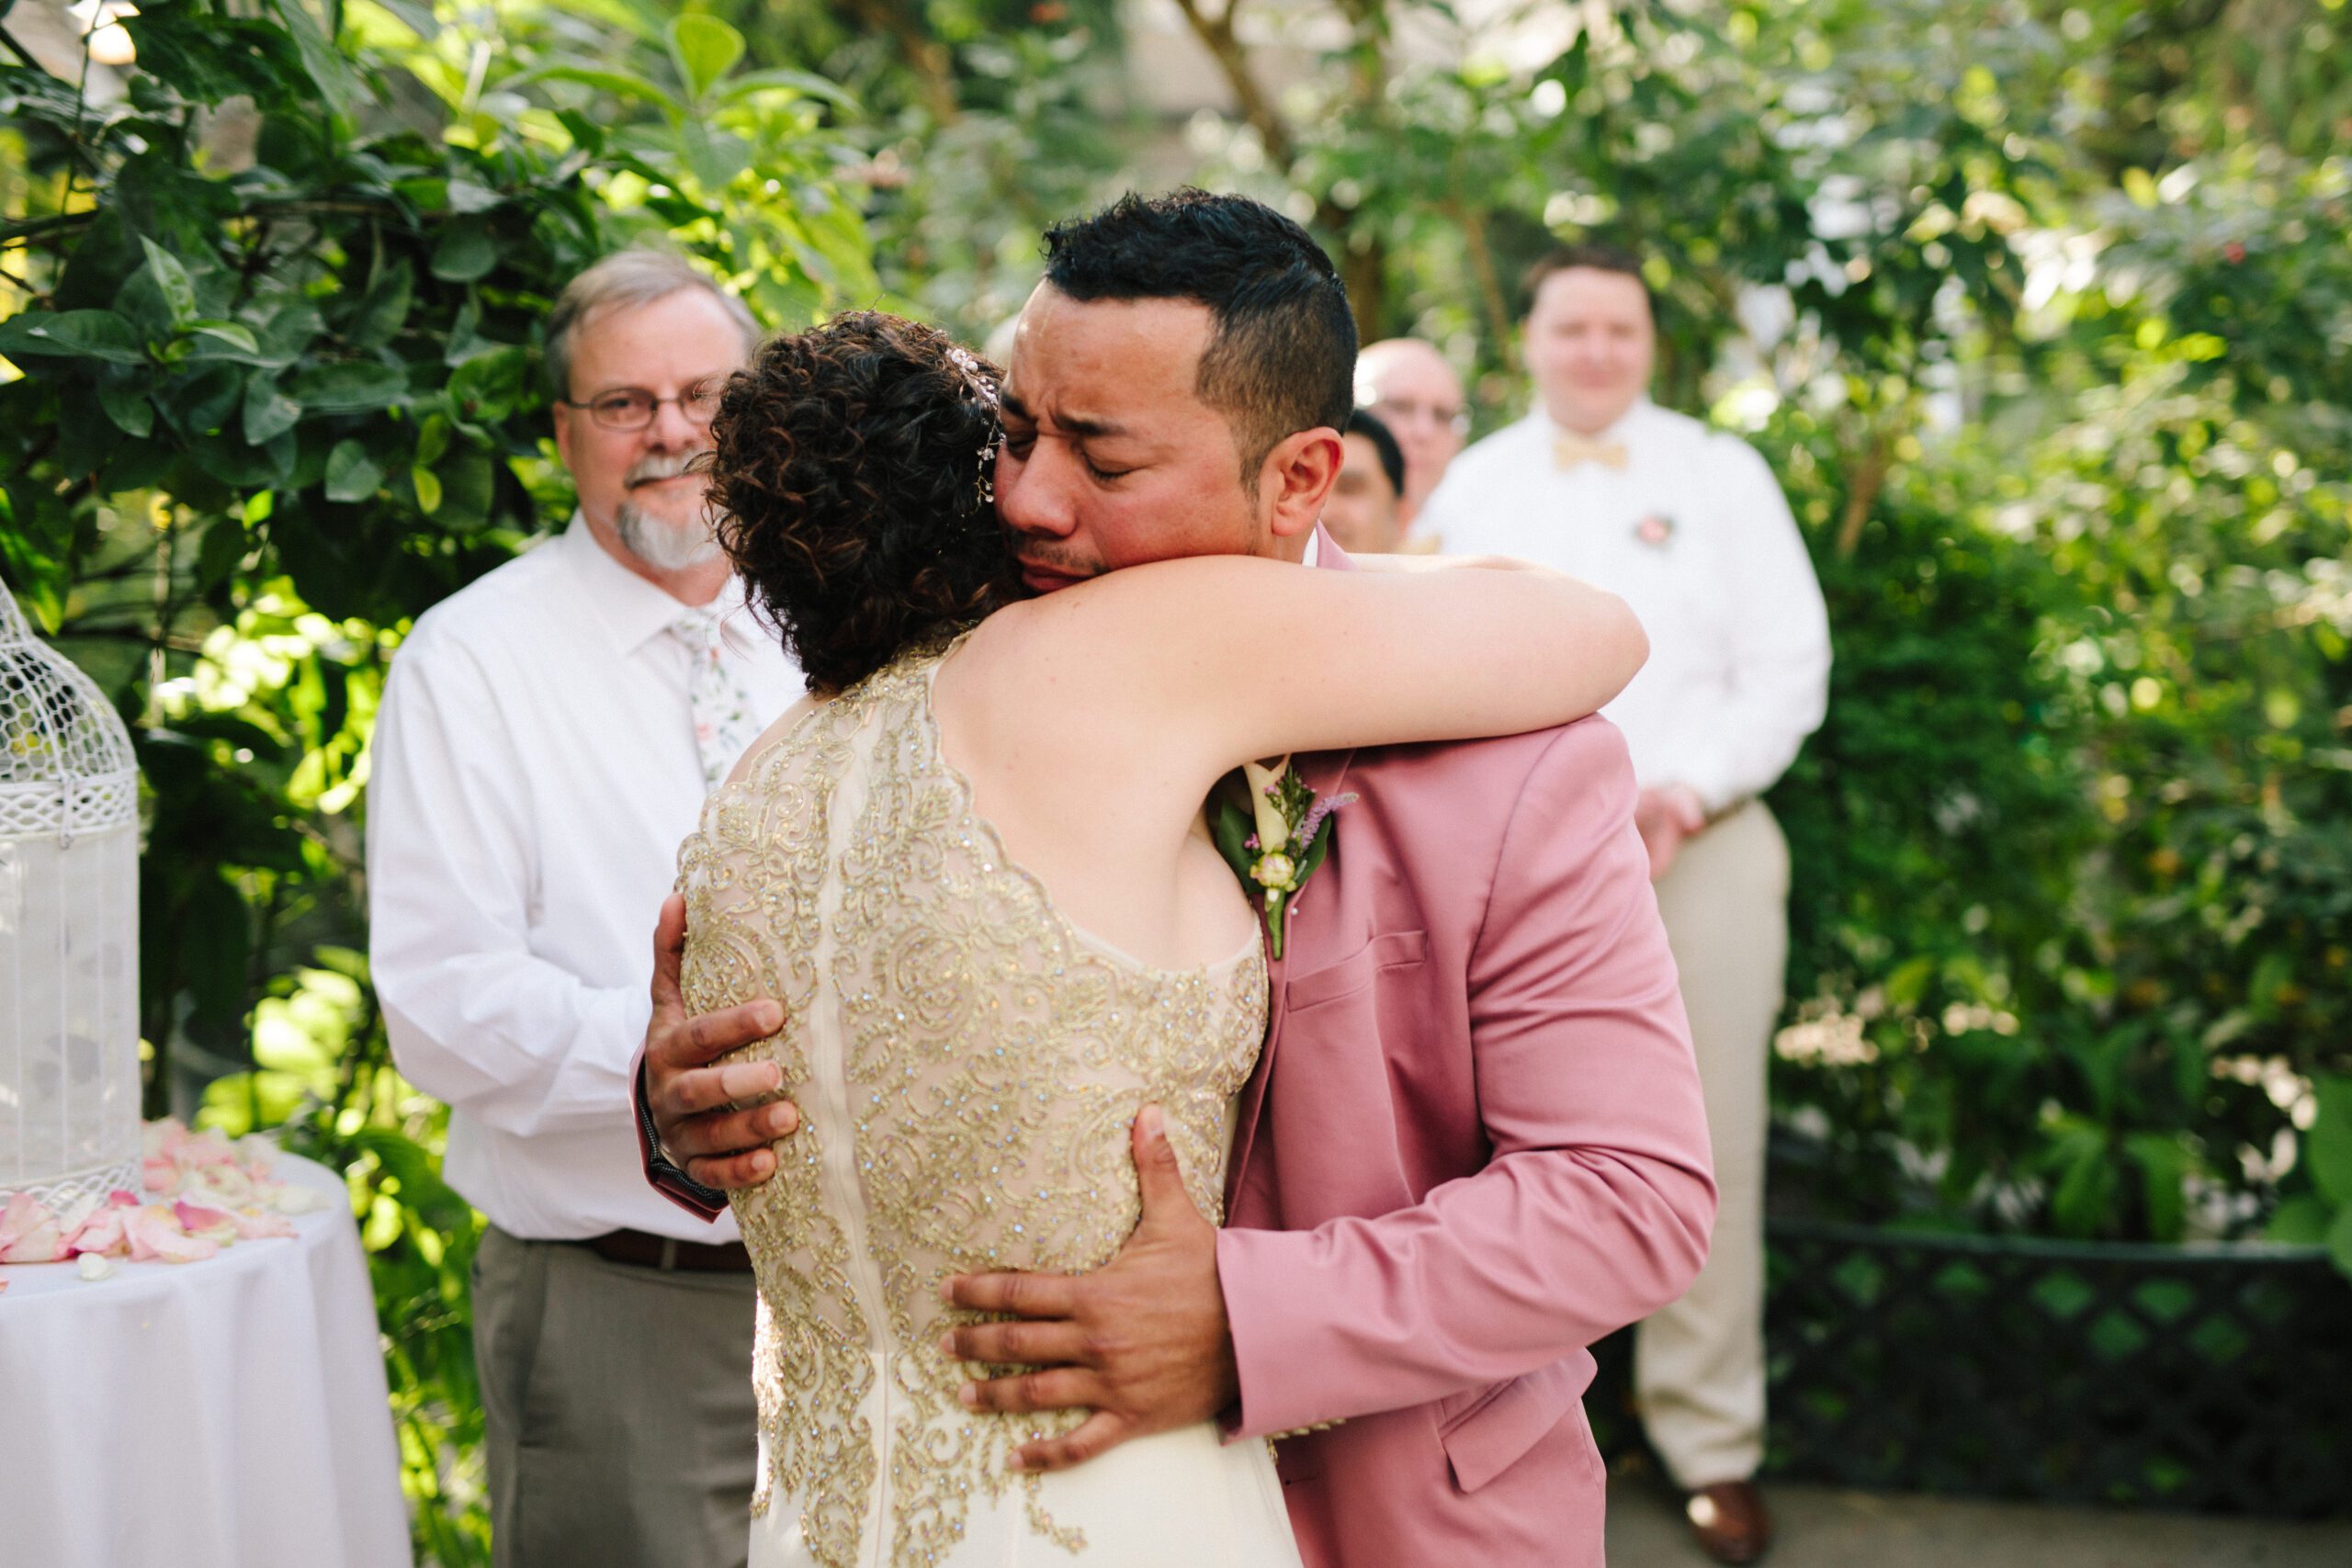 The groom hugs his bride after she shares her emotional vows at their Butterfly Pavilion wedding ceremony. 